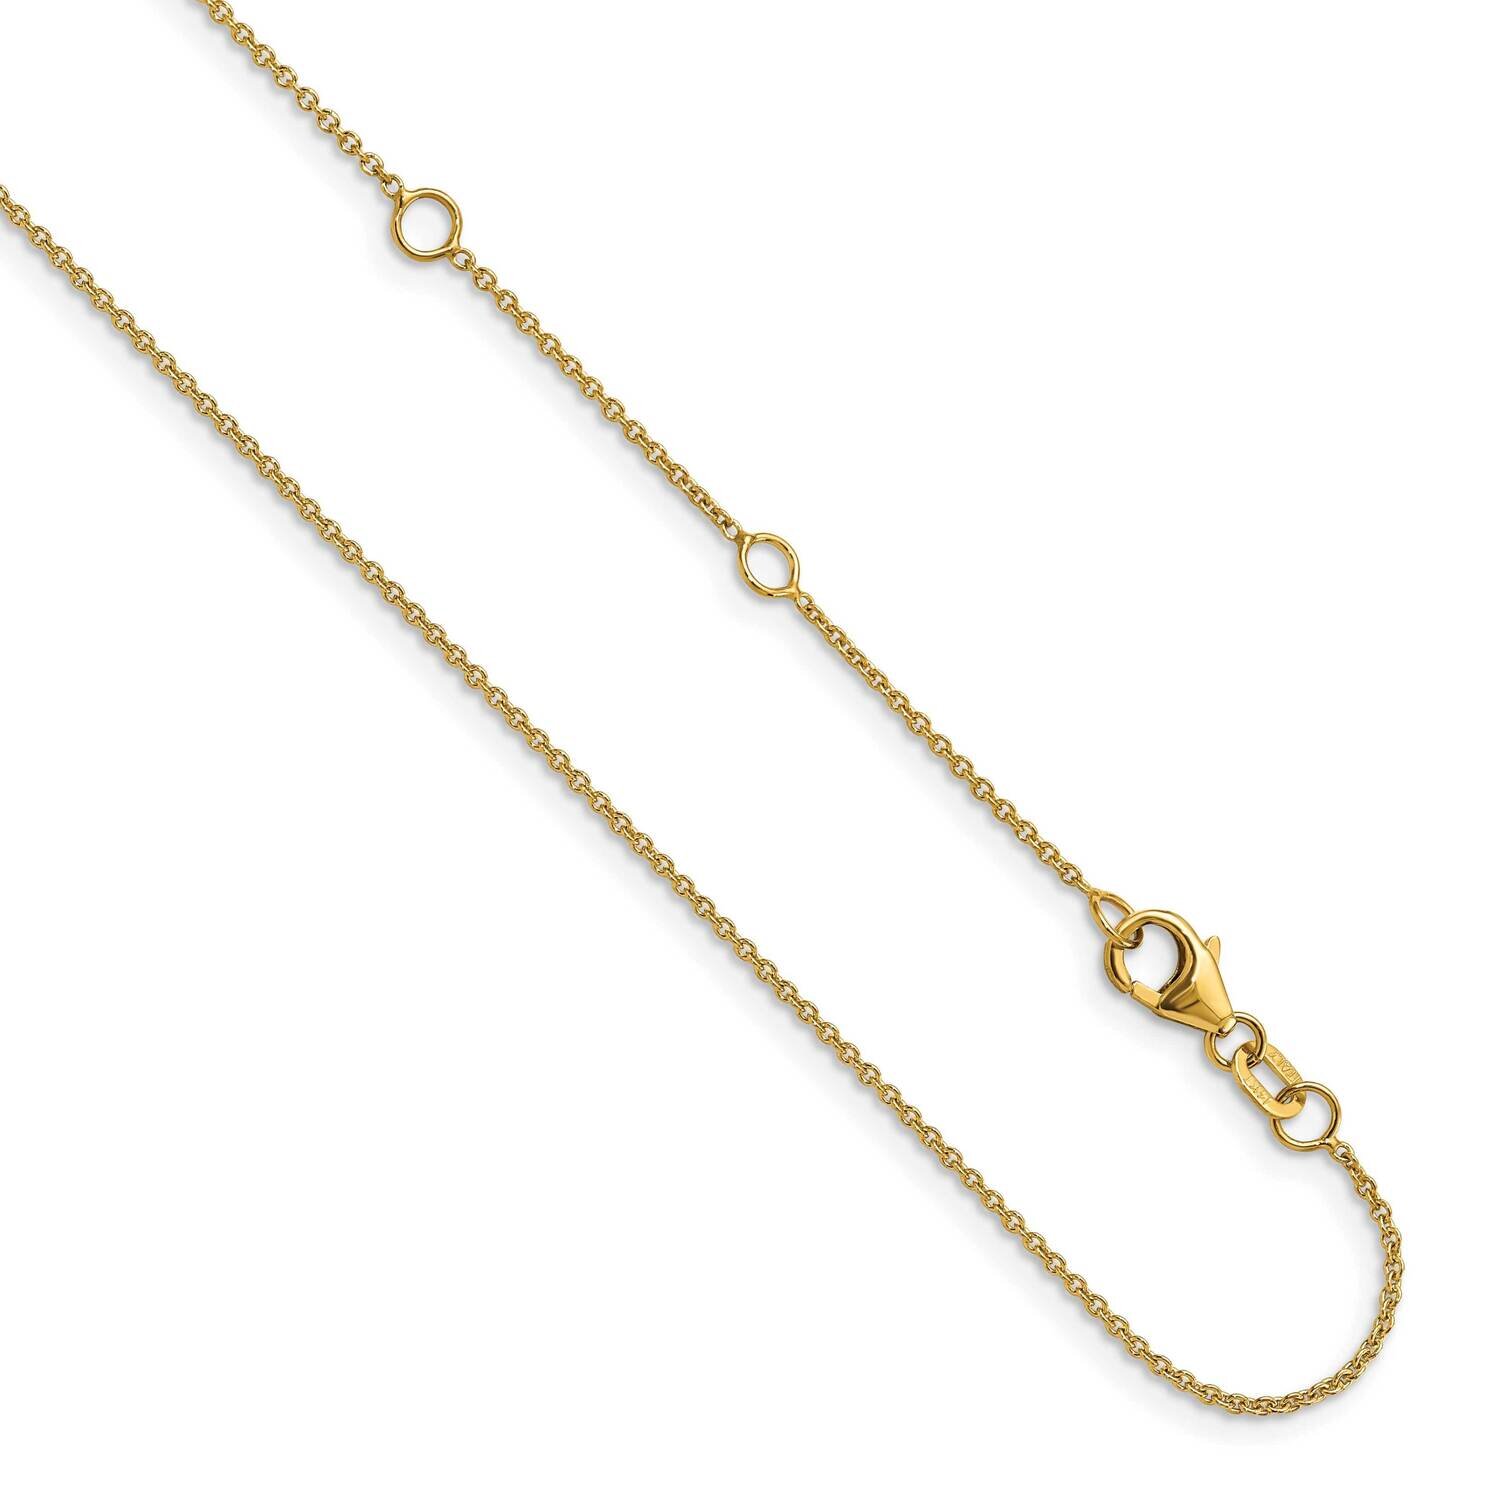 1.25mm Round Cable Adjustable Chain 18 Inch 14k Gold HB-1355-16+2